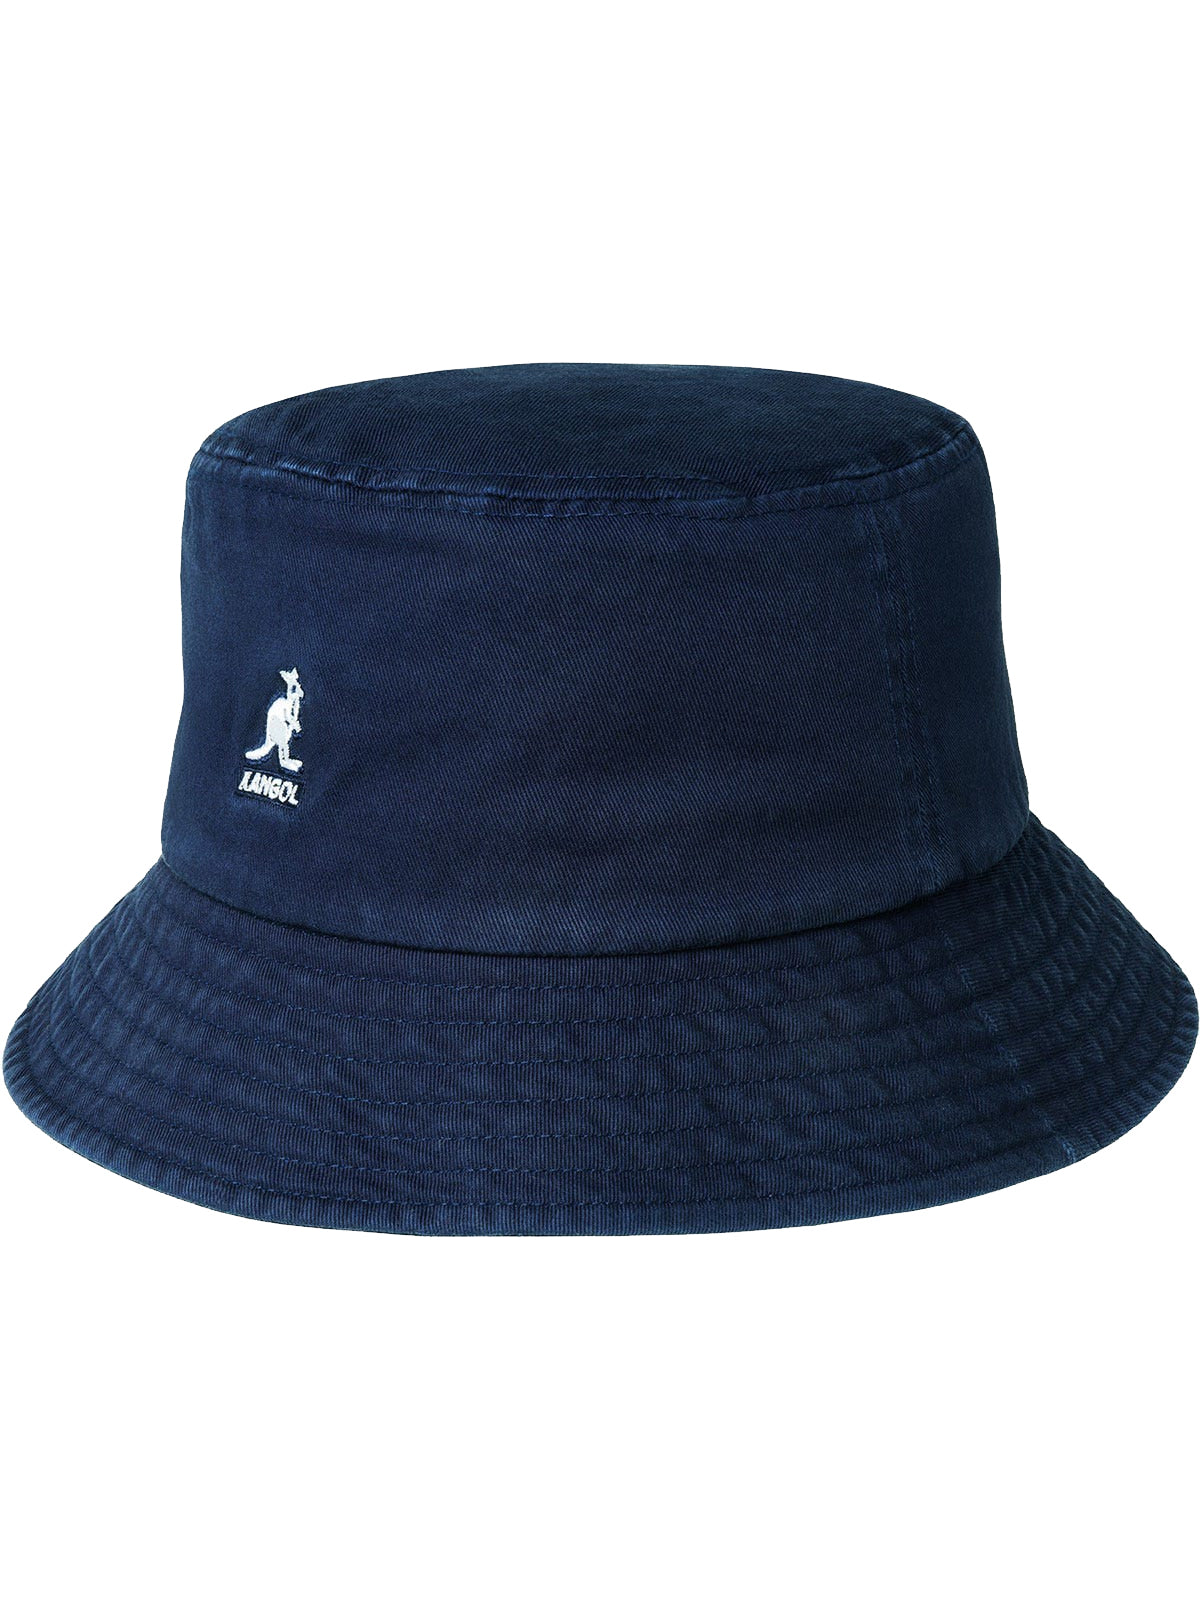 Kangol Washed Cotton Bucket Hat in Navy